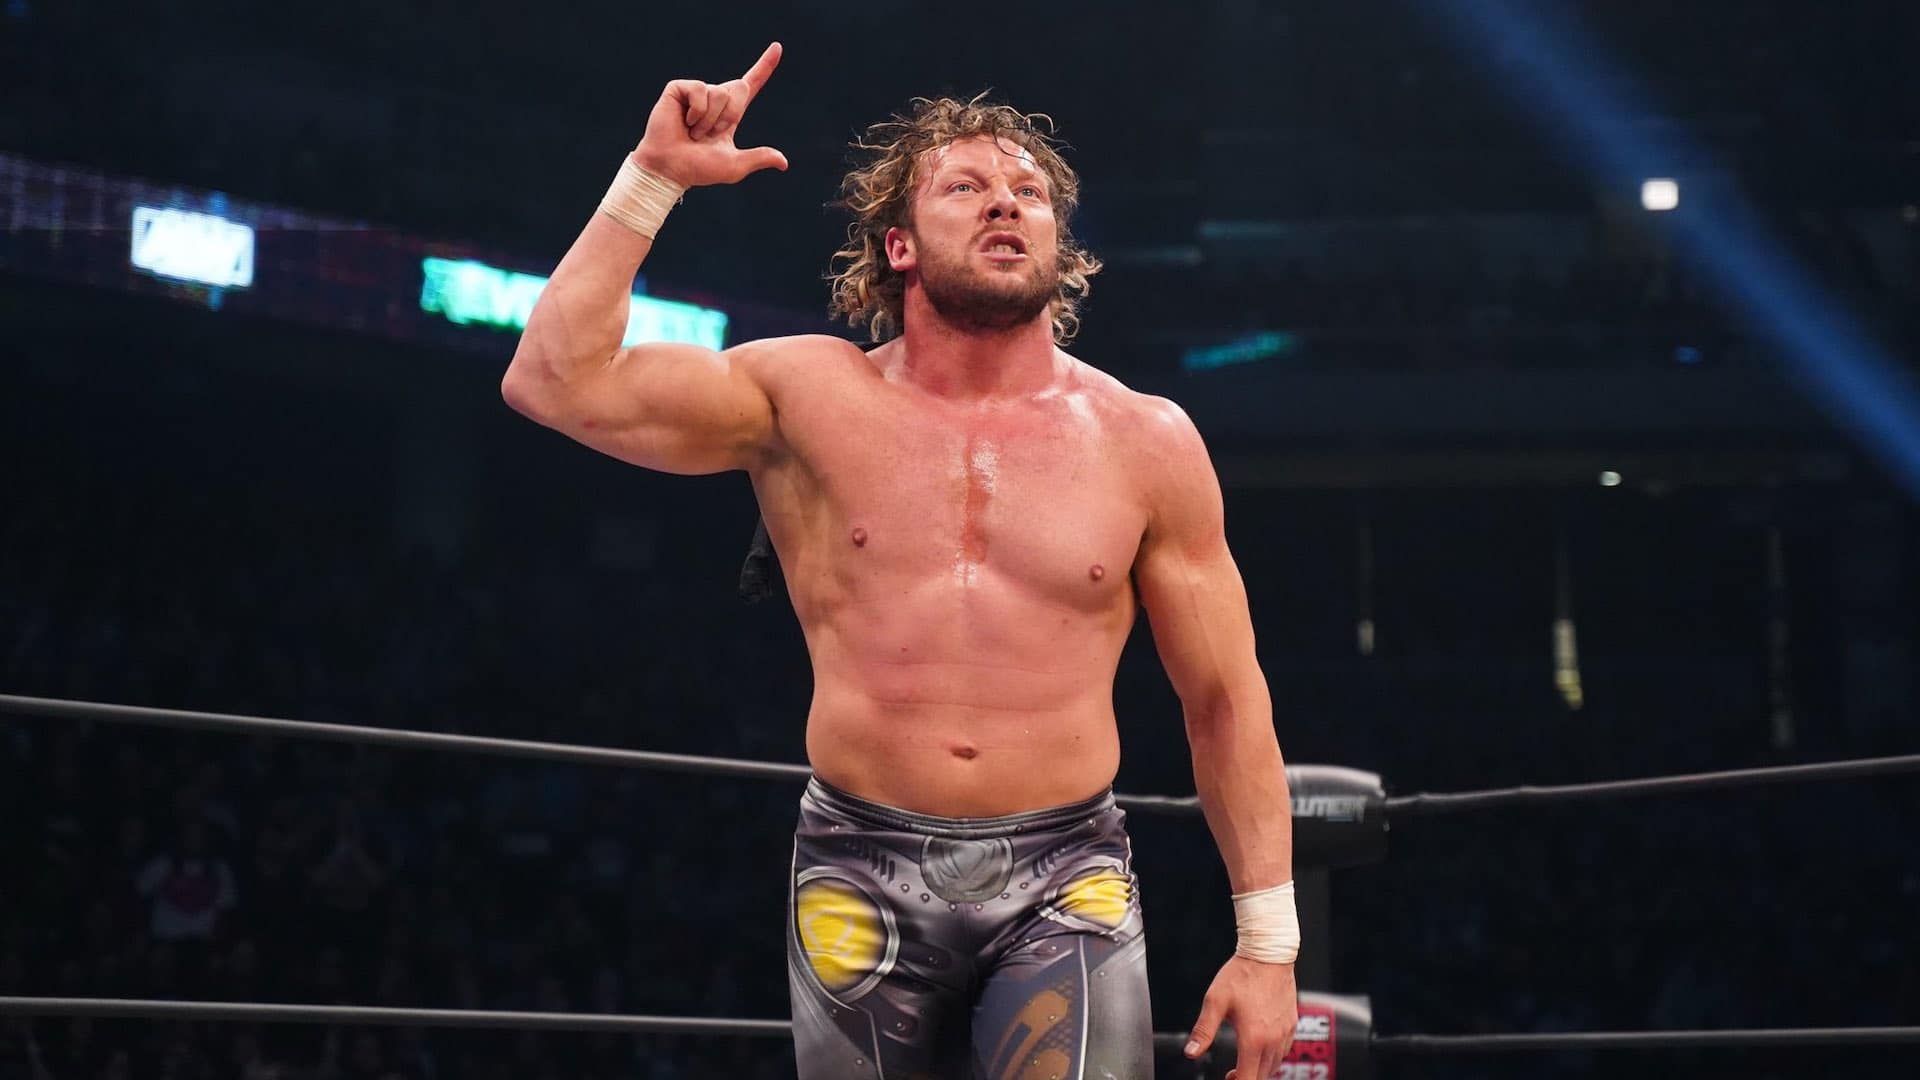 Kenny Omega, Being The Elite Wiki